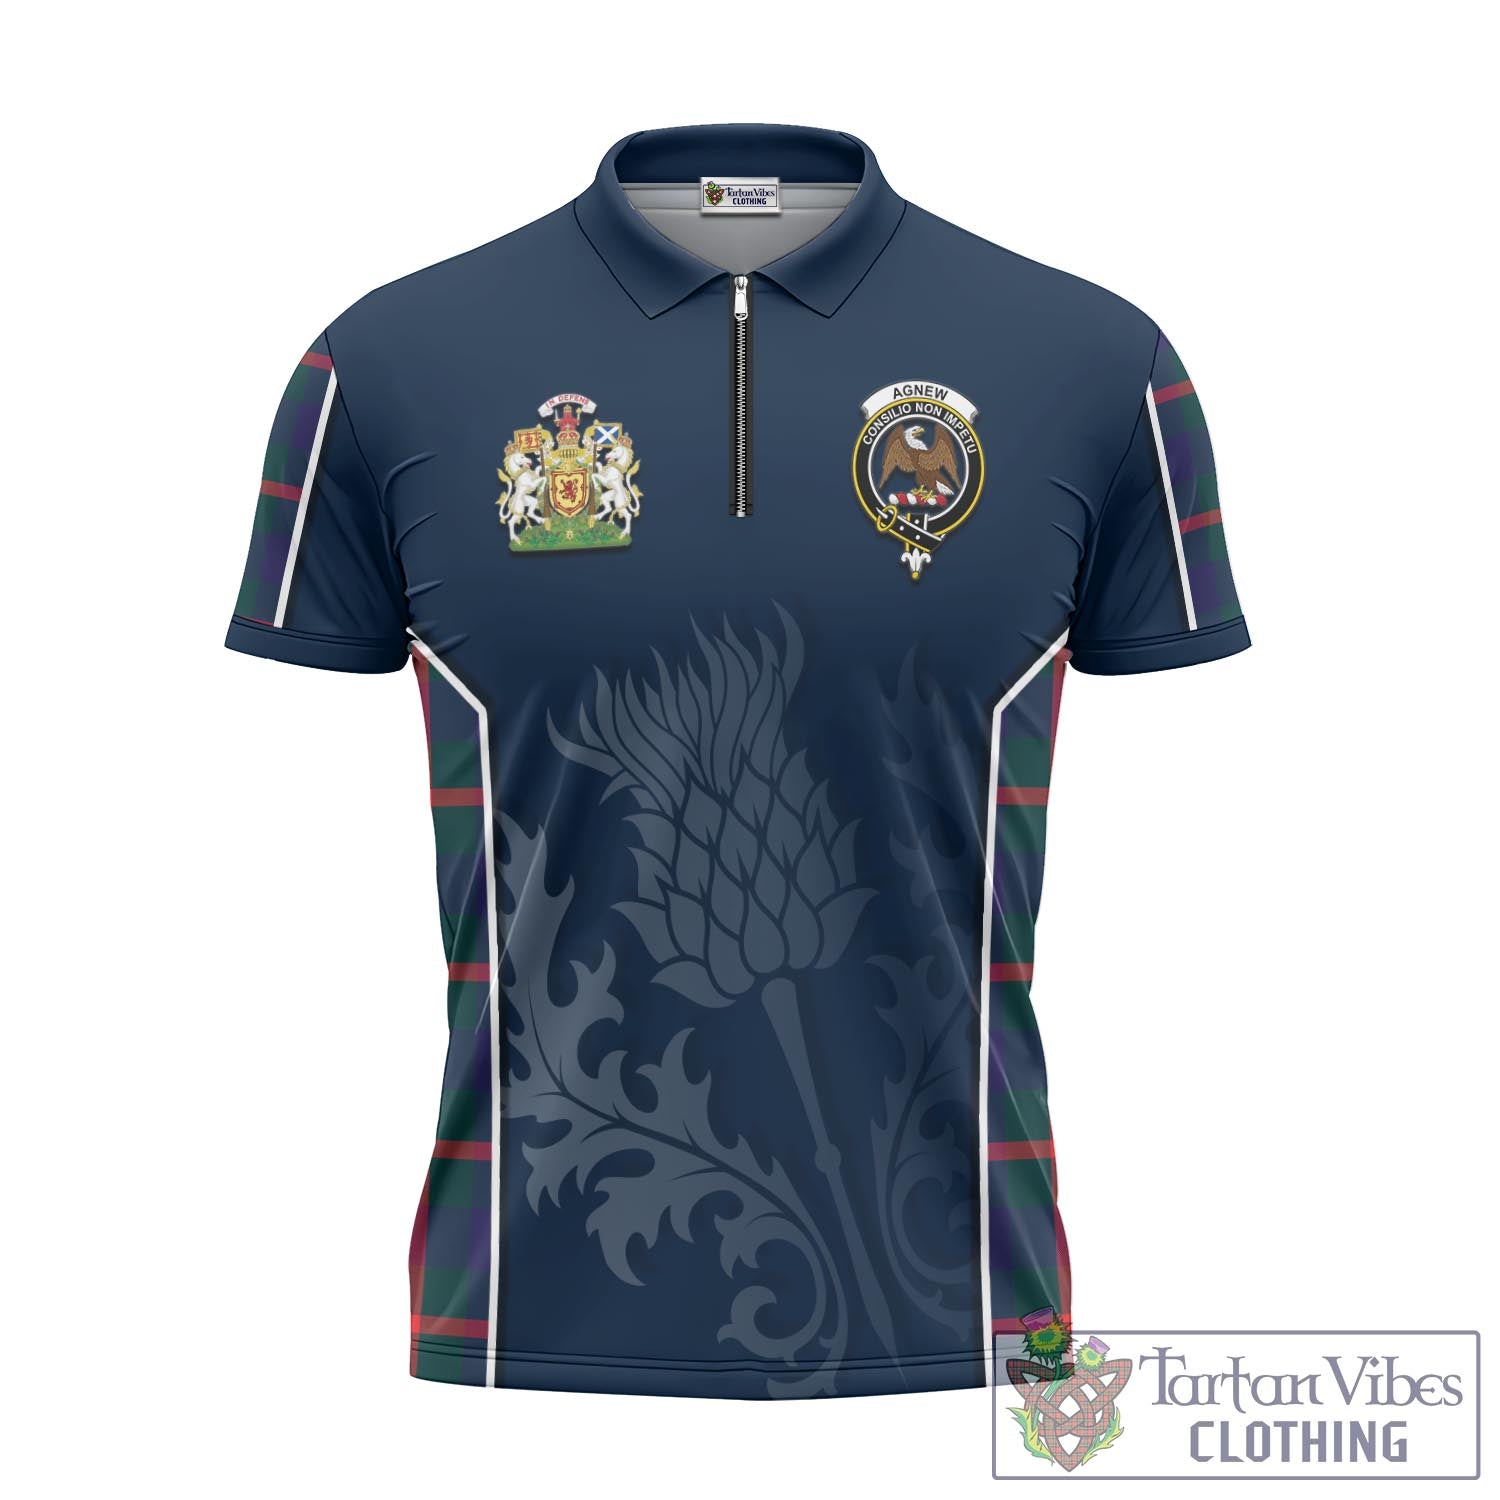 Tartan Vibes Clothing Agnew Modern Tartan Zipper Polo Shirt with Family Crest and Scottish Thistle Vibes Sport Style